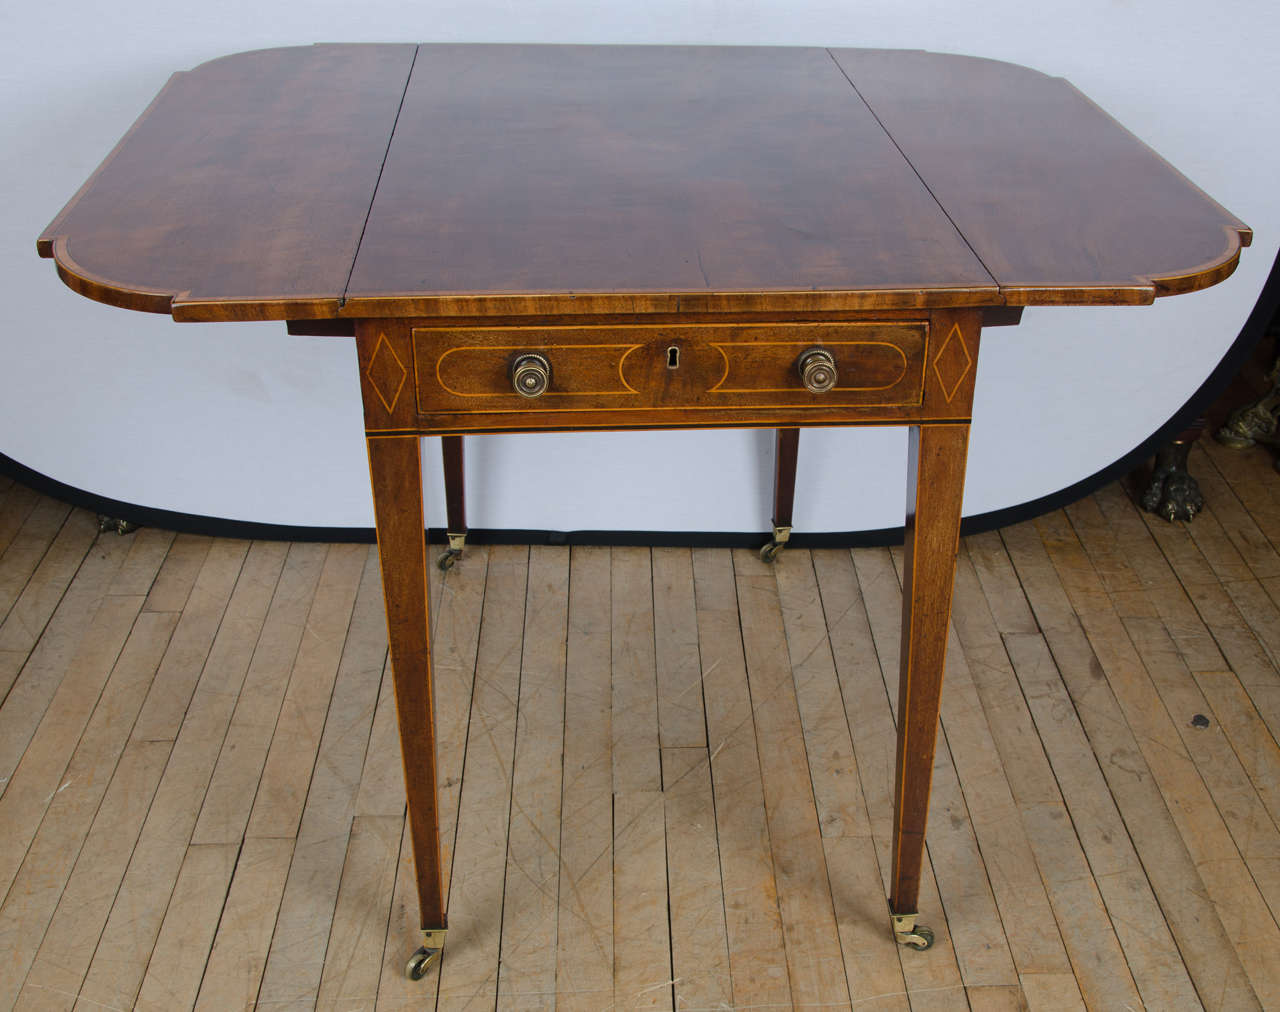 A Splendid Georgian mahogany Pembroke table inlaid and cross banded with Satinwood. The table features shaped leaves and boxwood stringing on the border of the cross banding. The Pembroke stands on square tapered legs with brass caps and castors. It